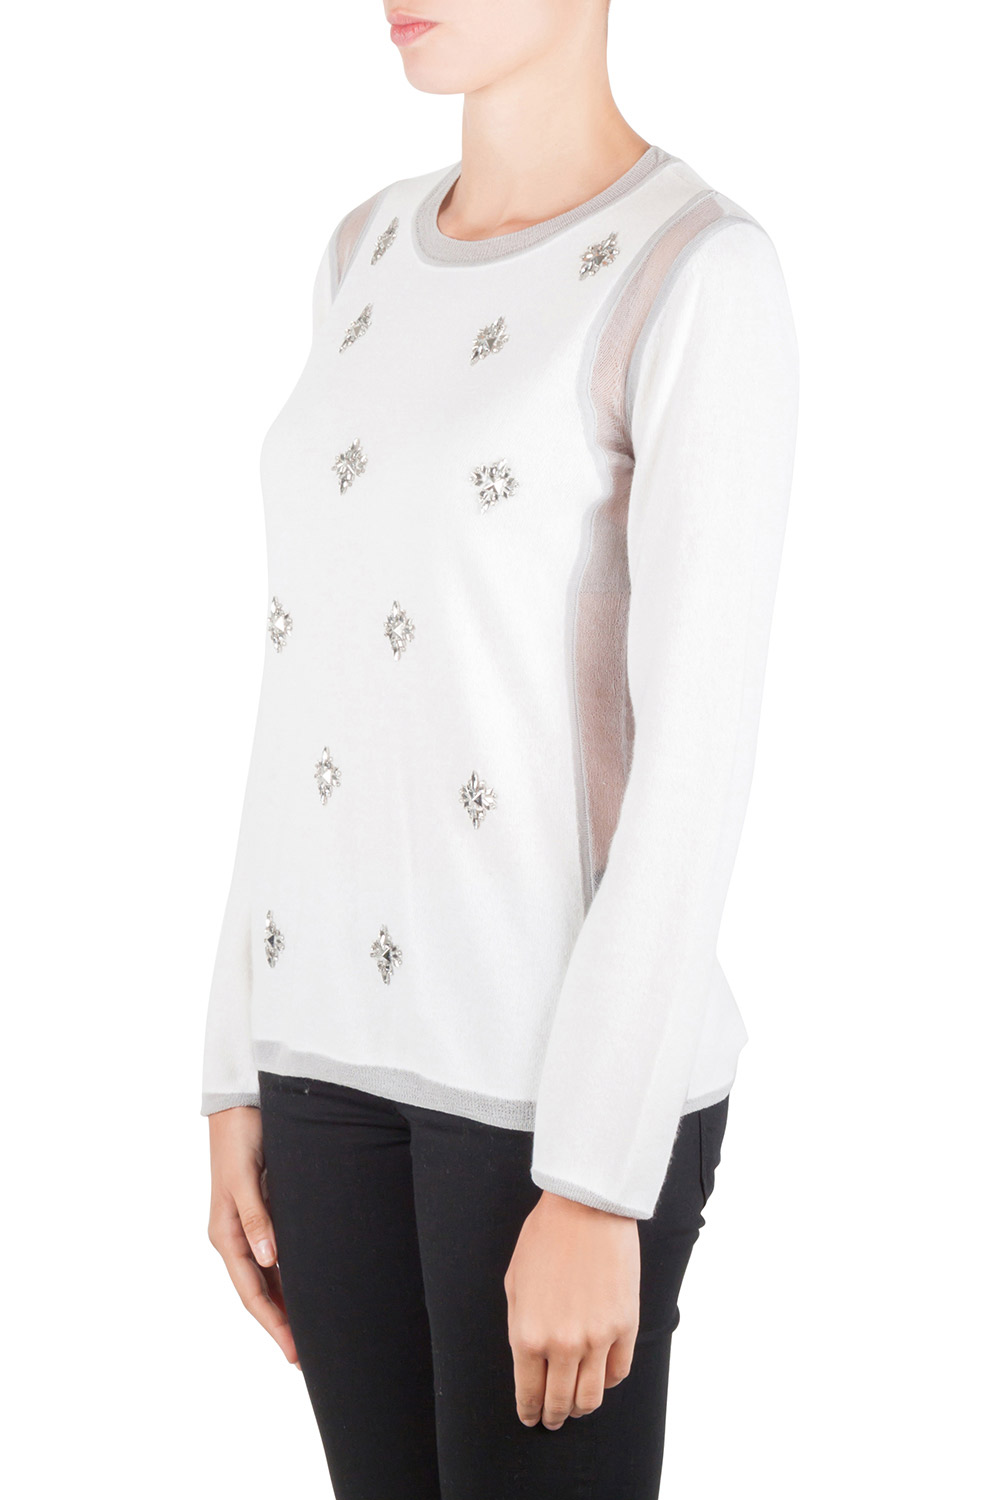 

Rebecca Taylor Ivory and Grey Crystal Embellished Mesh Inset Crew Neck Sweater, Cream